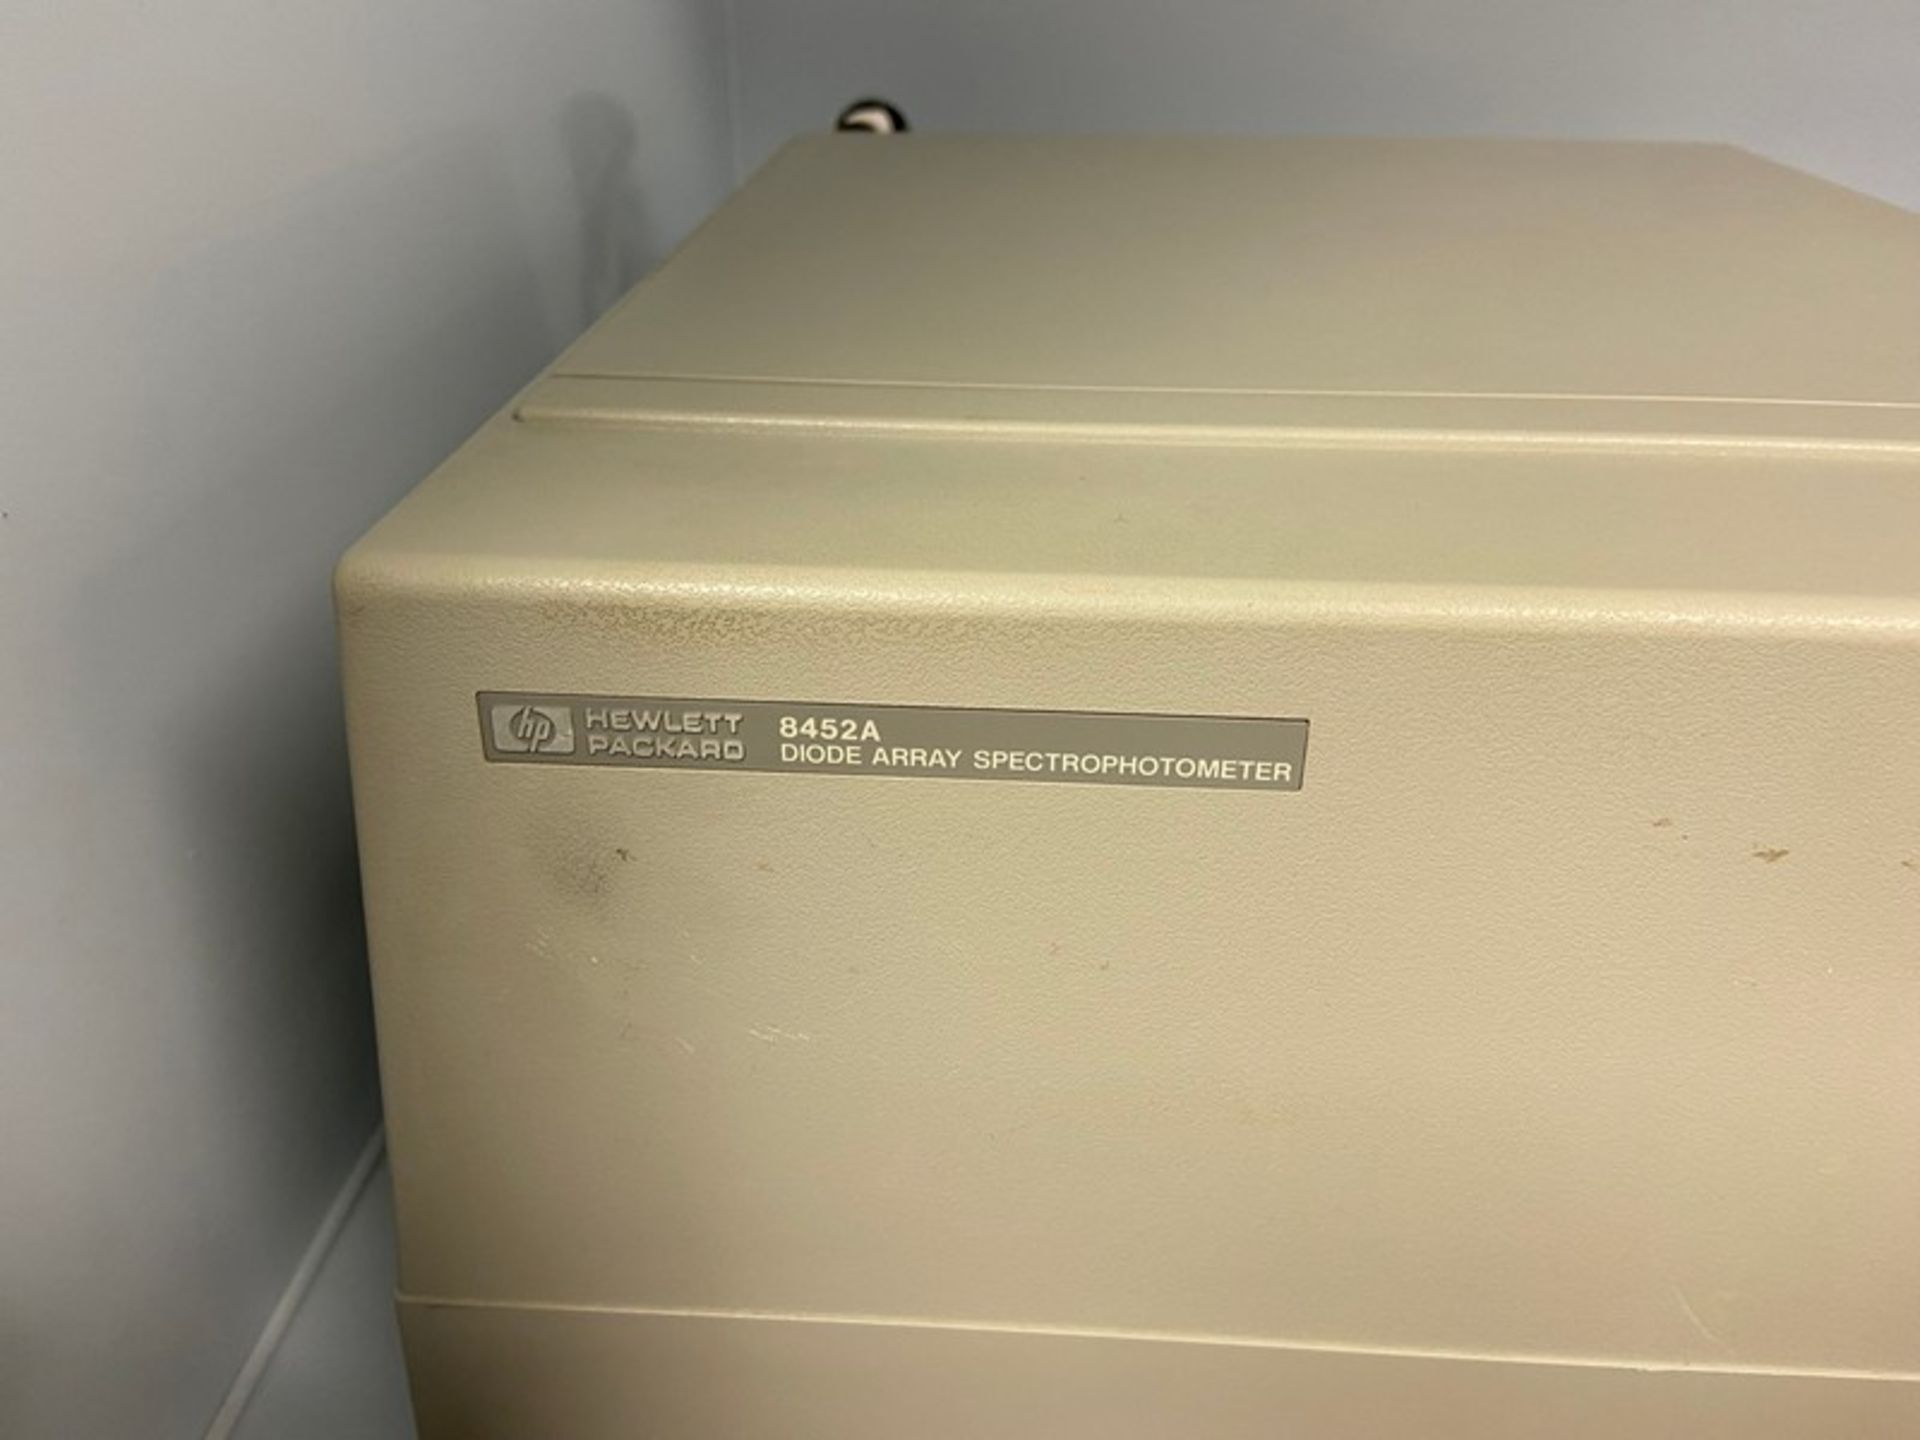 Hewlett Packard Diode Array Spectrophotometer, M/N 8452A (LOCATED IN MIDDLETOWN, N.Y.)-FOR PACKAGING - Image 3 of 3